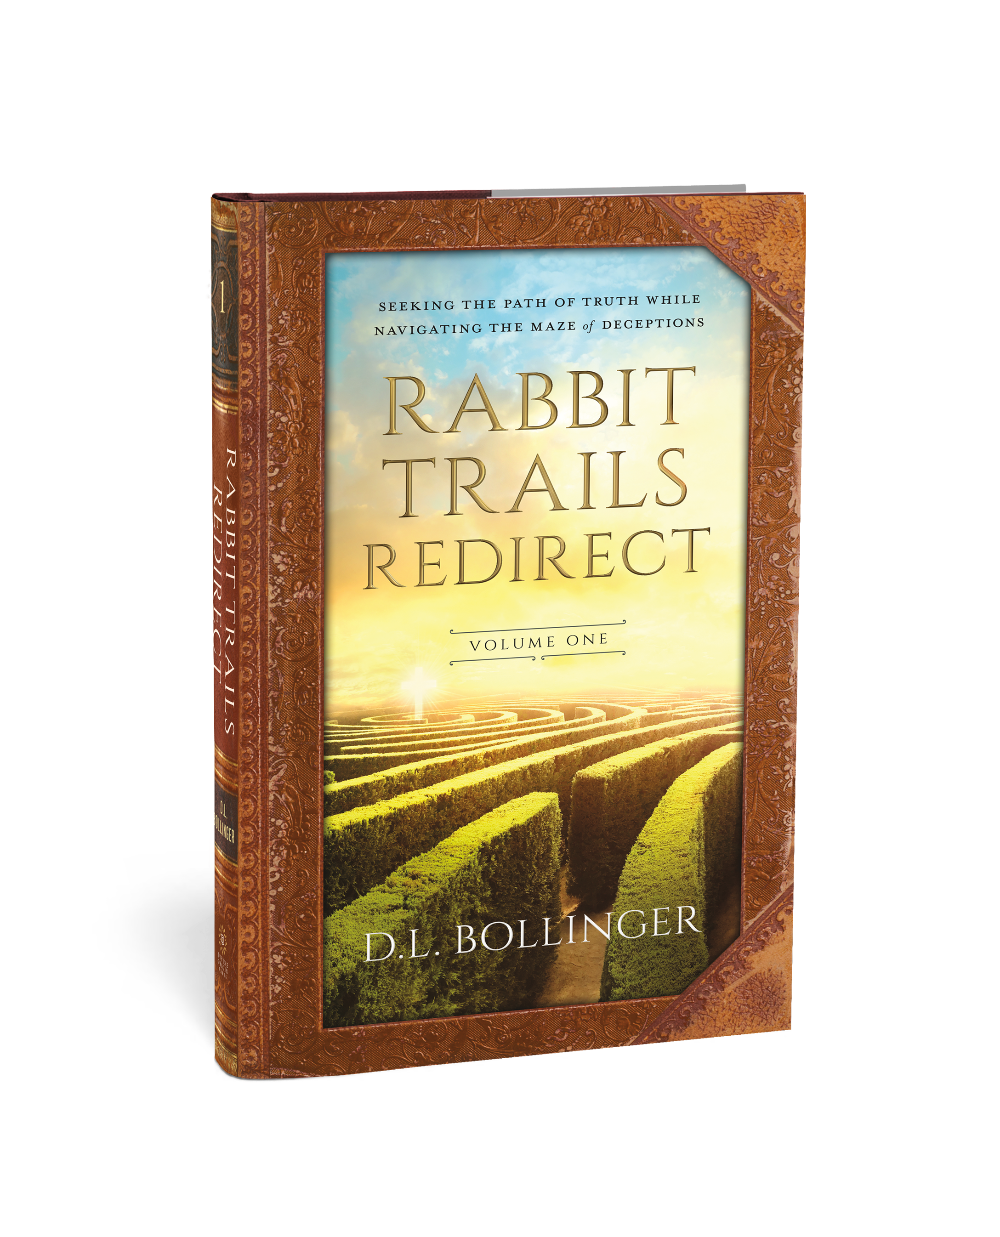 Rabbit Trails Redirect (Volume One) by author D.L. Bollinger — Hardcover 